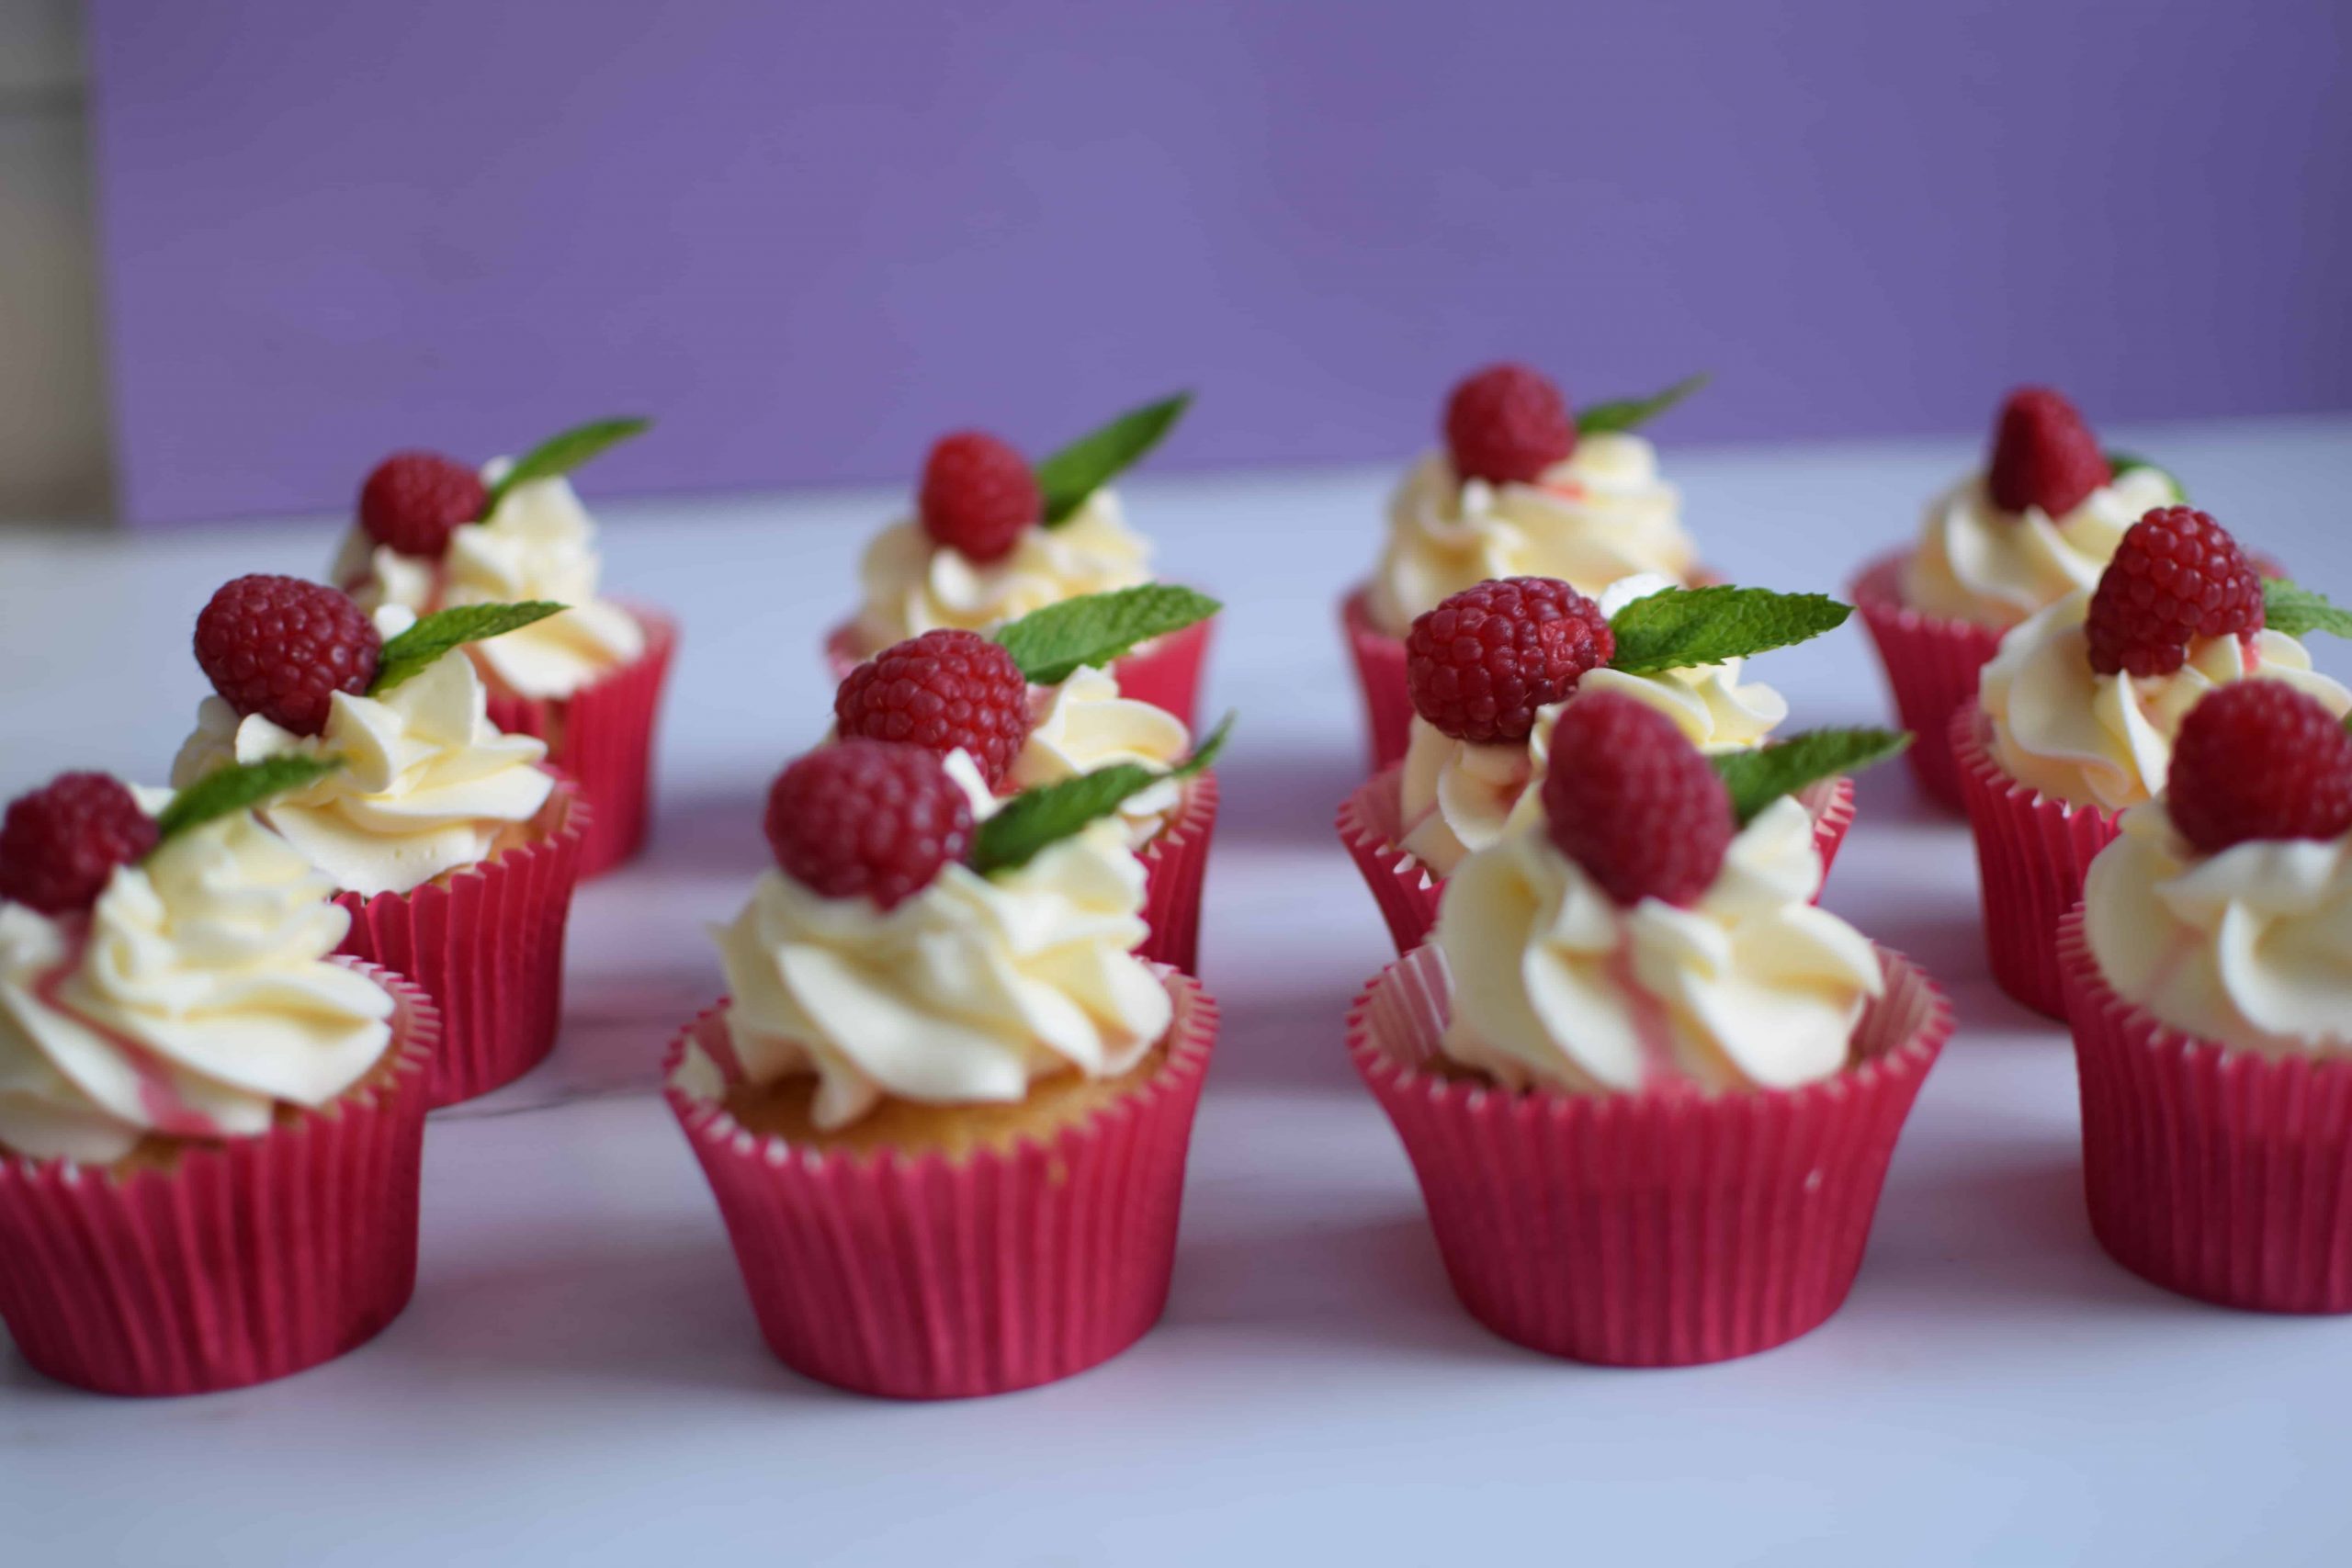 Copelands Raspberry and Mint infused Gin Cupcakes Gallery Image